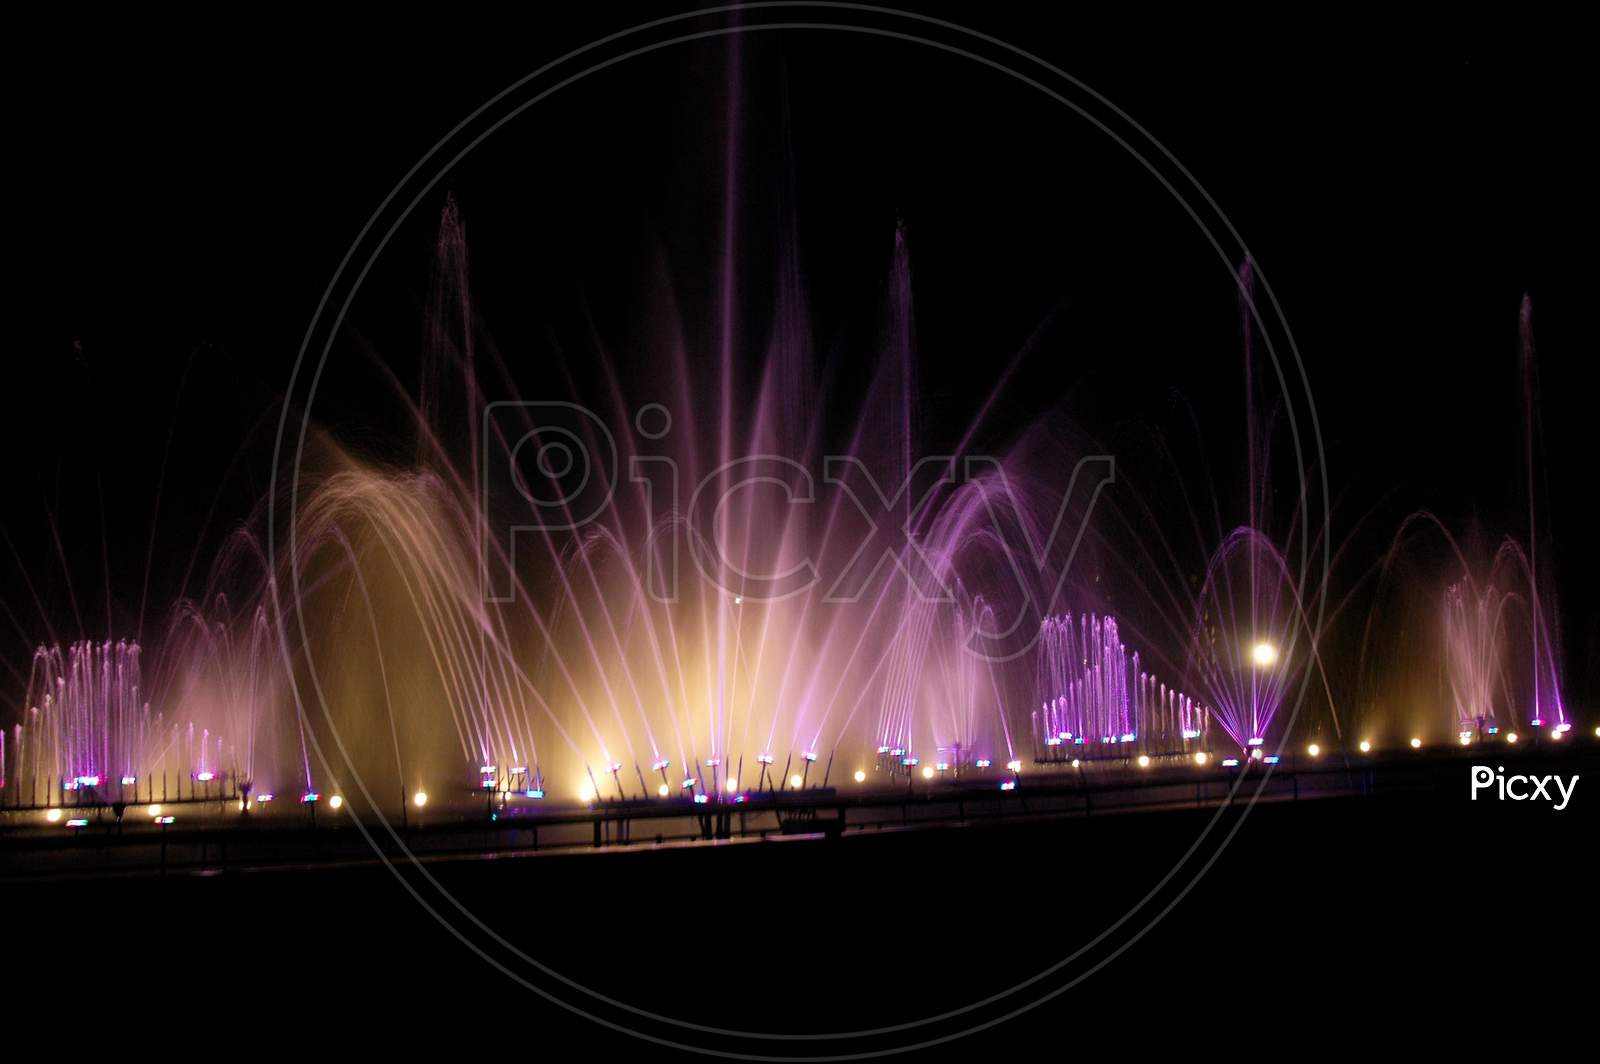 Musical fountain with colorful illuminations at night